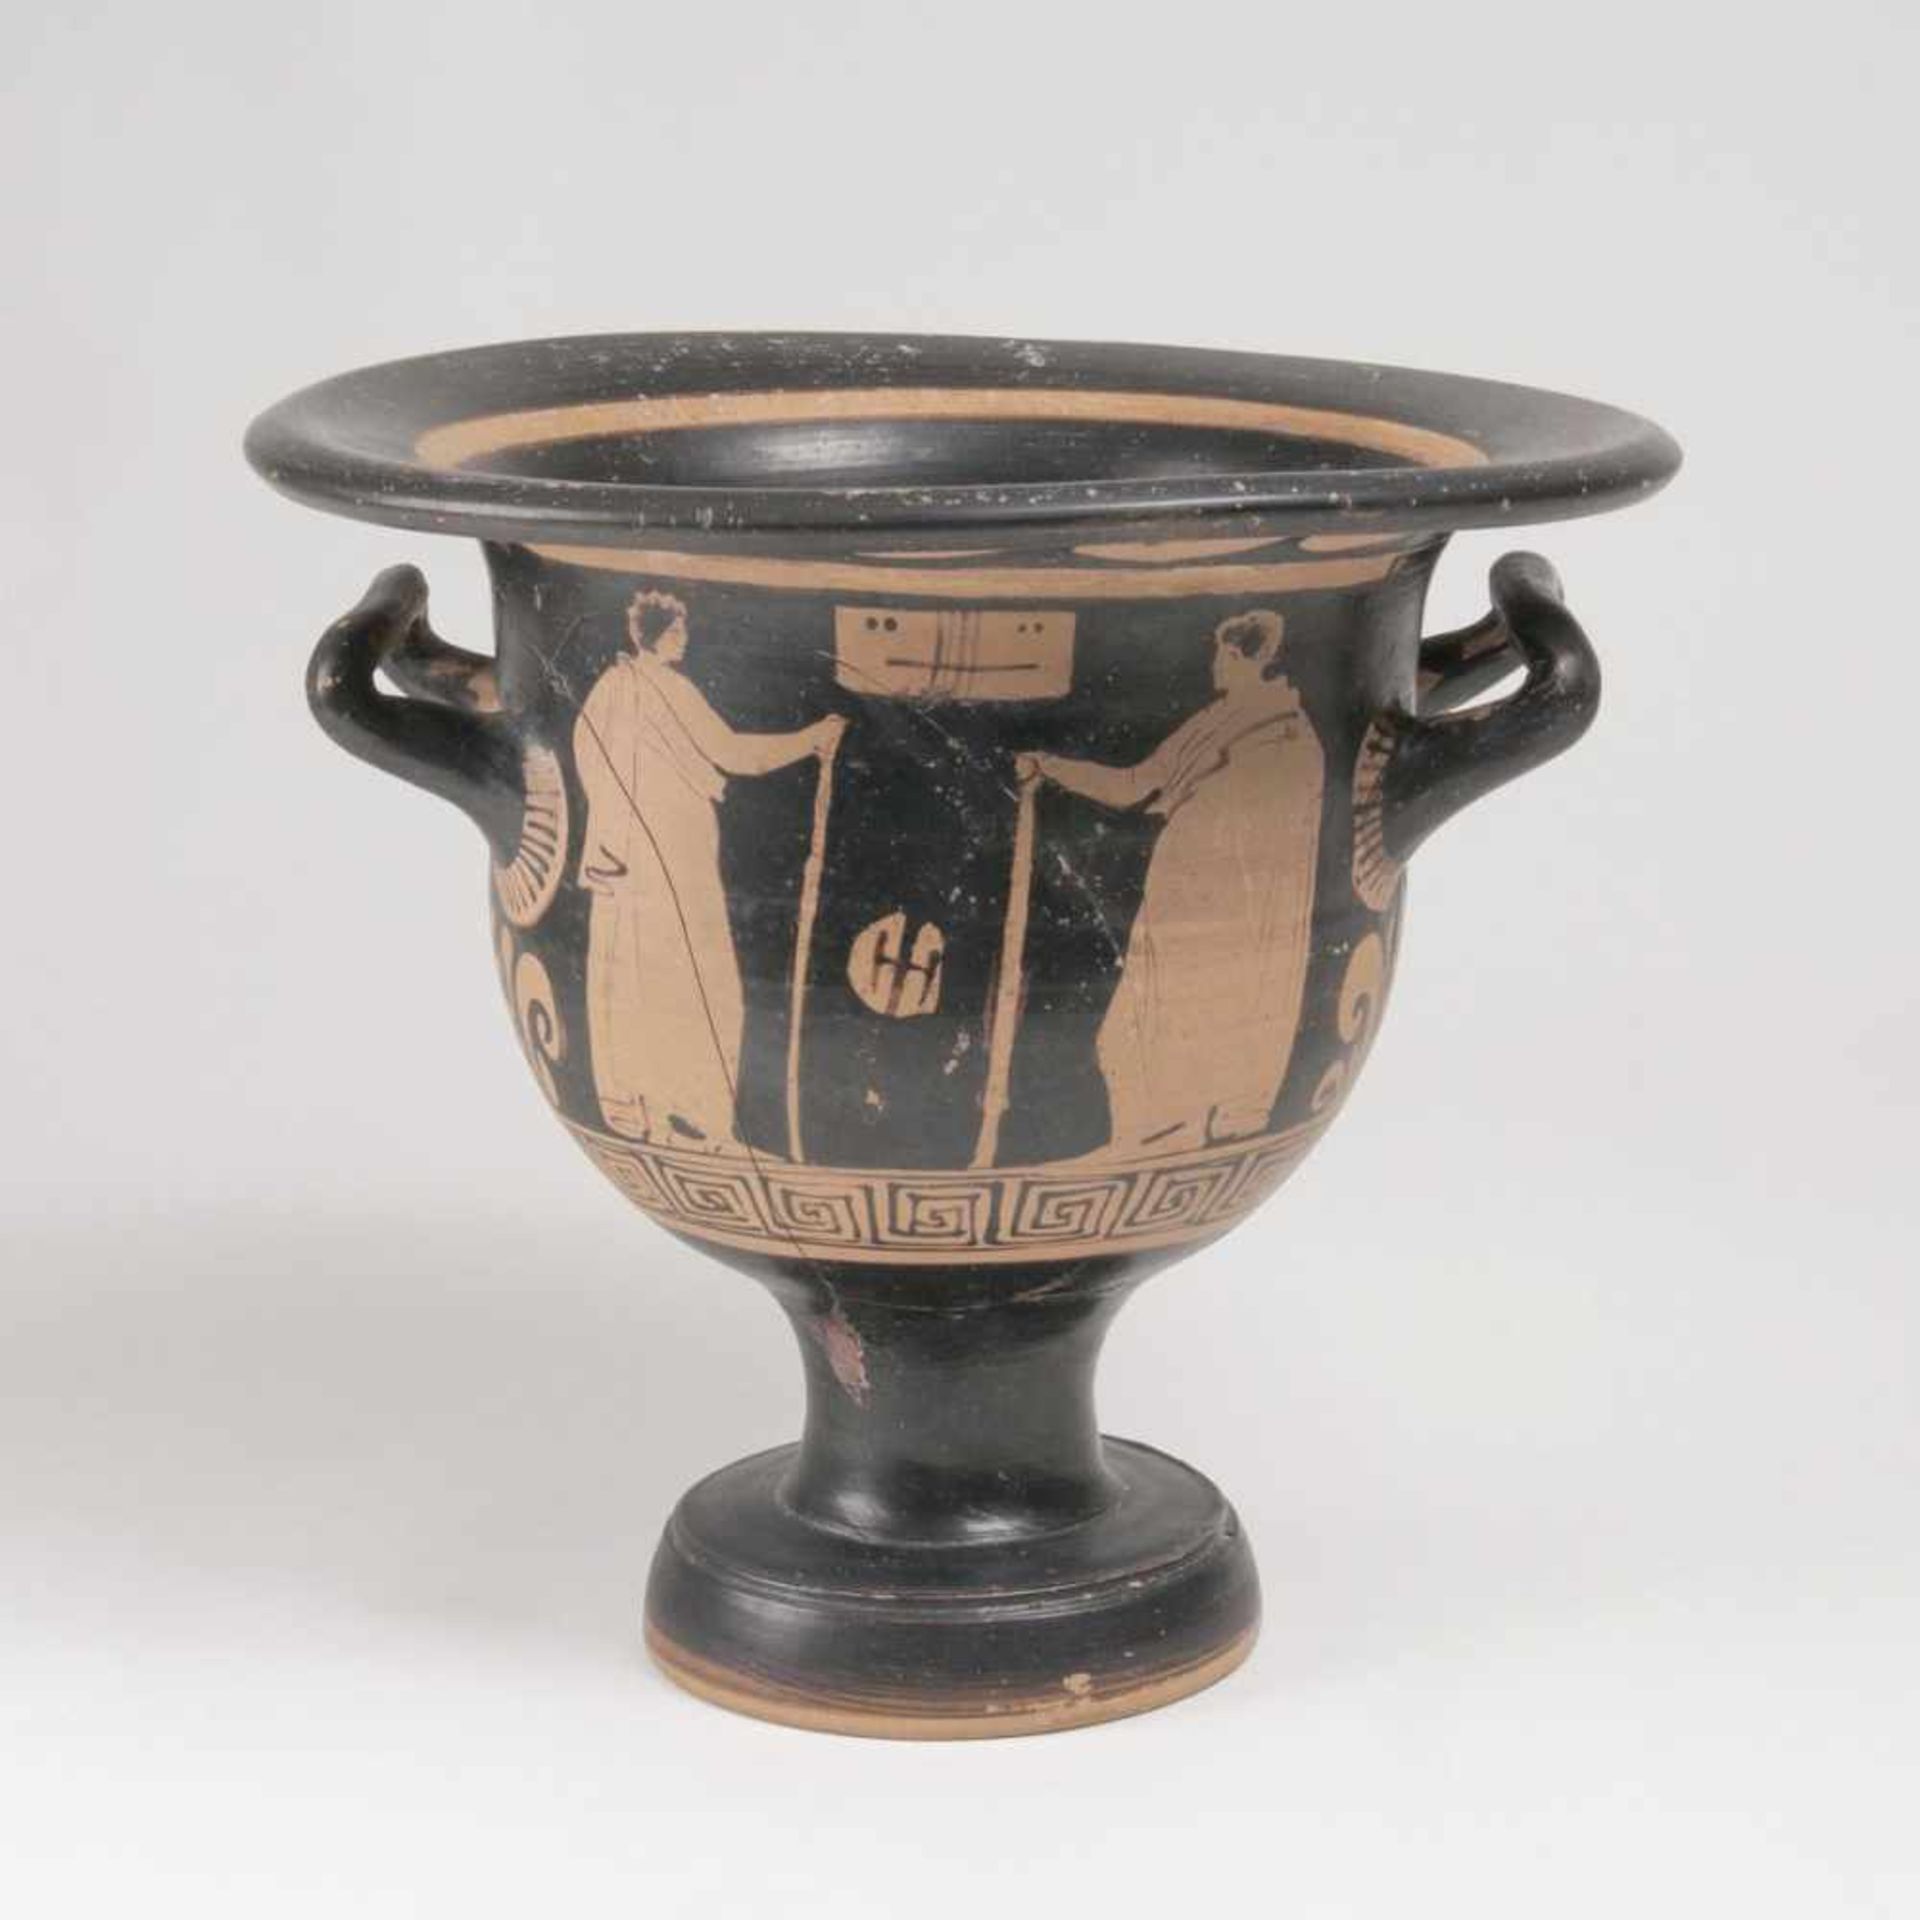 An Apulian Red-Figured Bell KraterCa. mid 4th cent. B.C. Terrakotta. The obverse with a draped